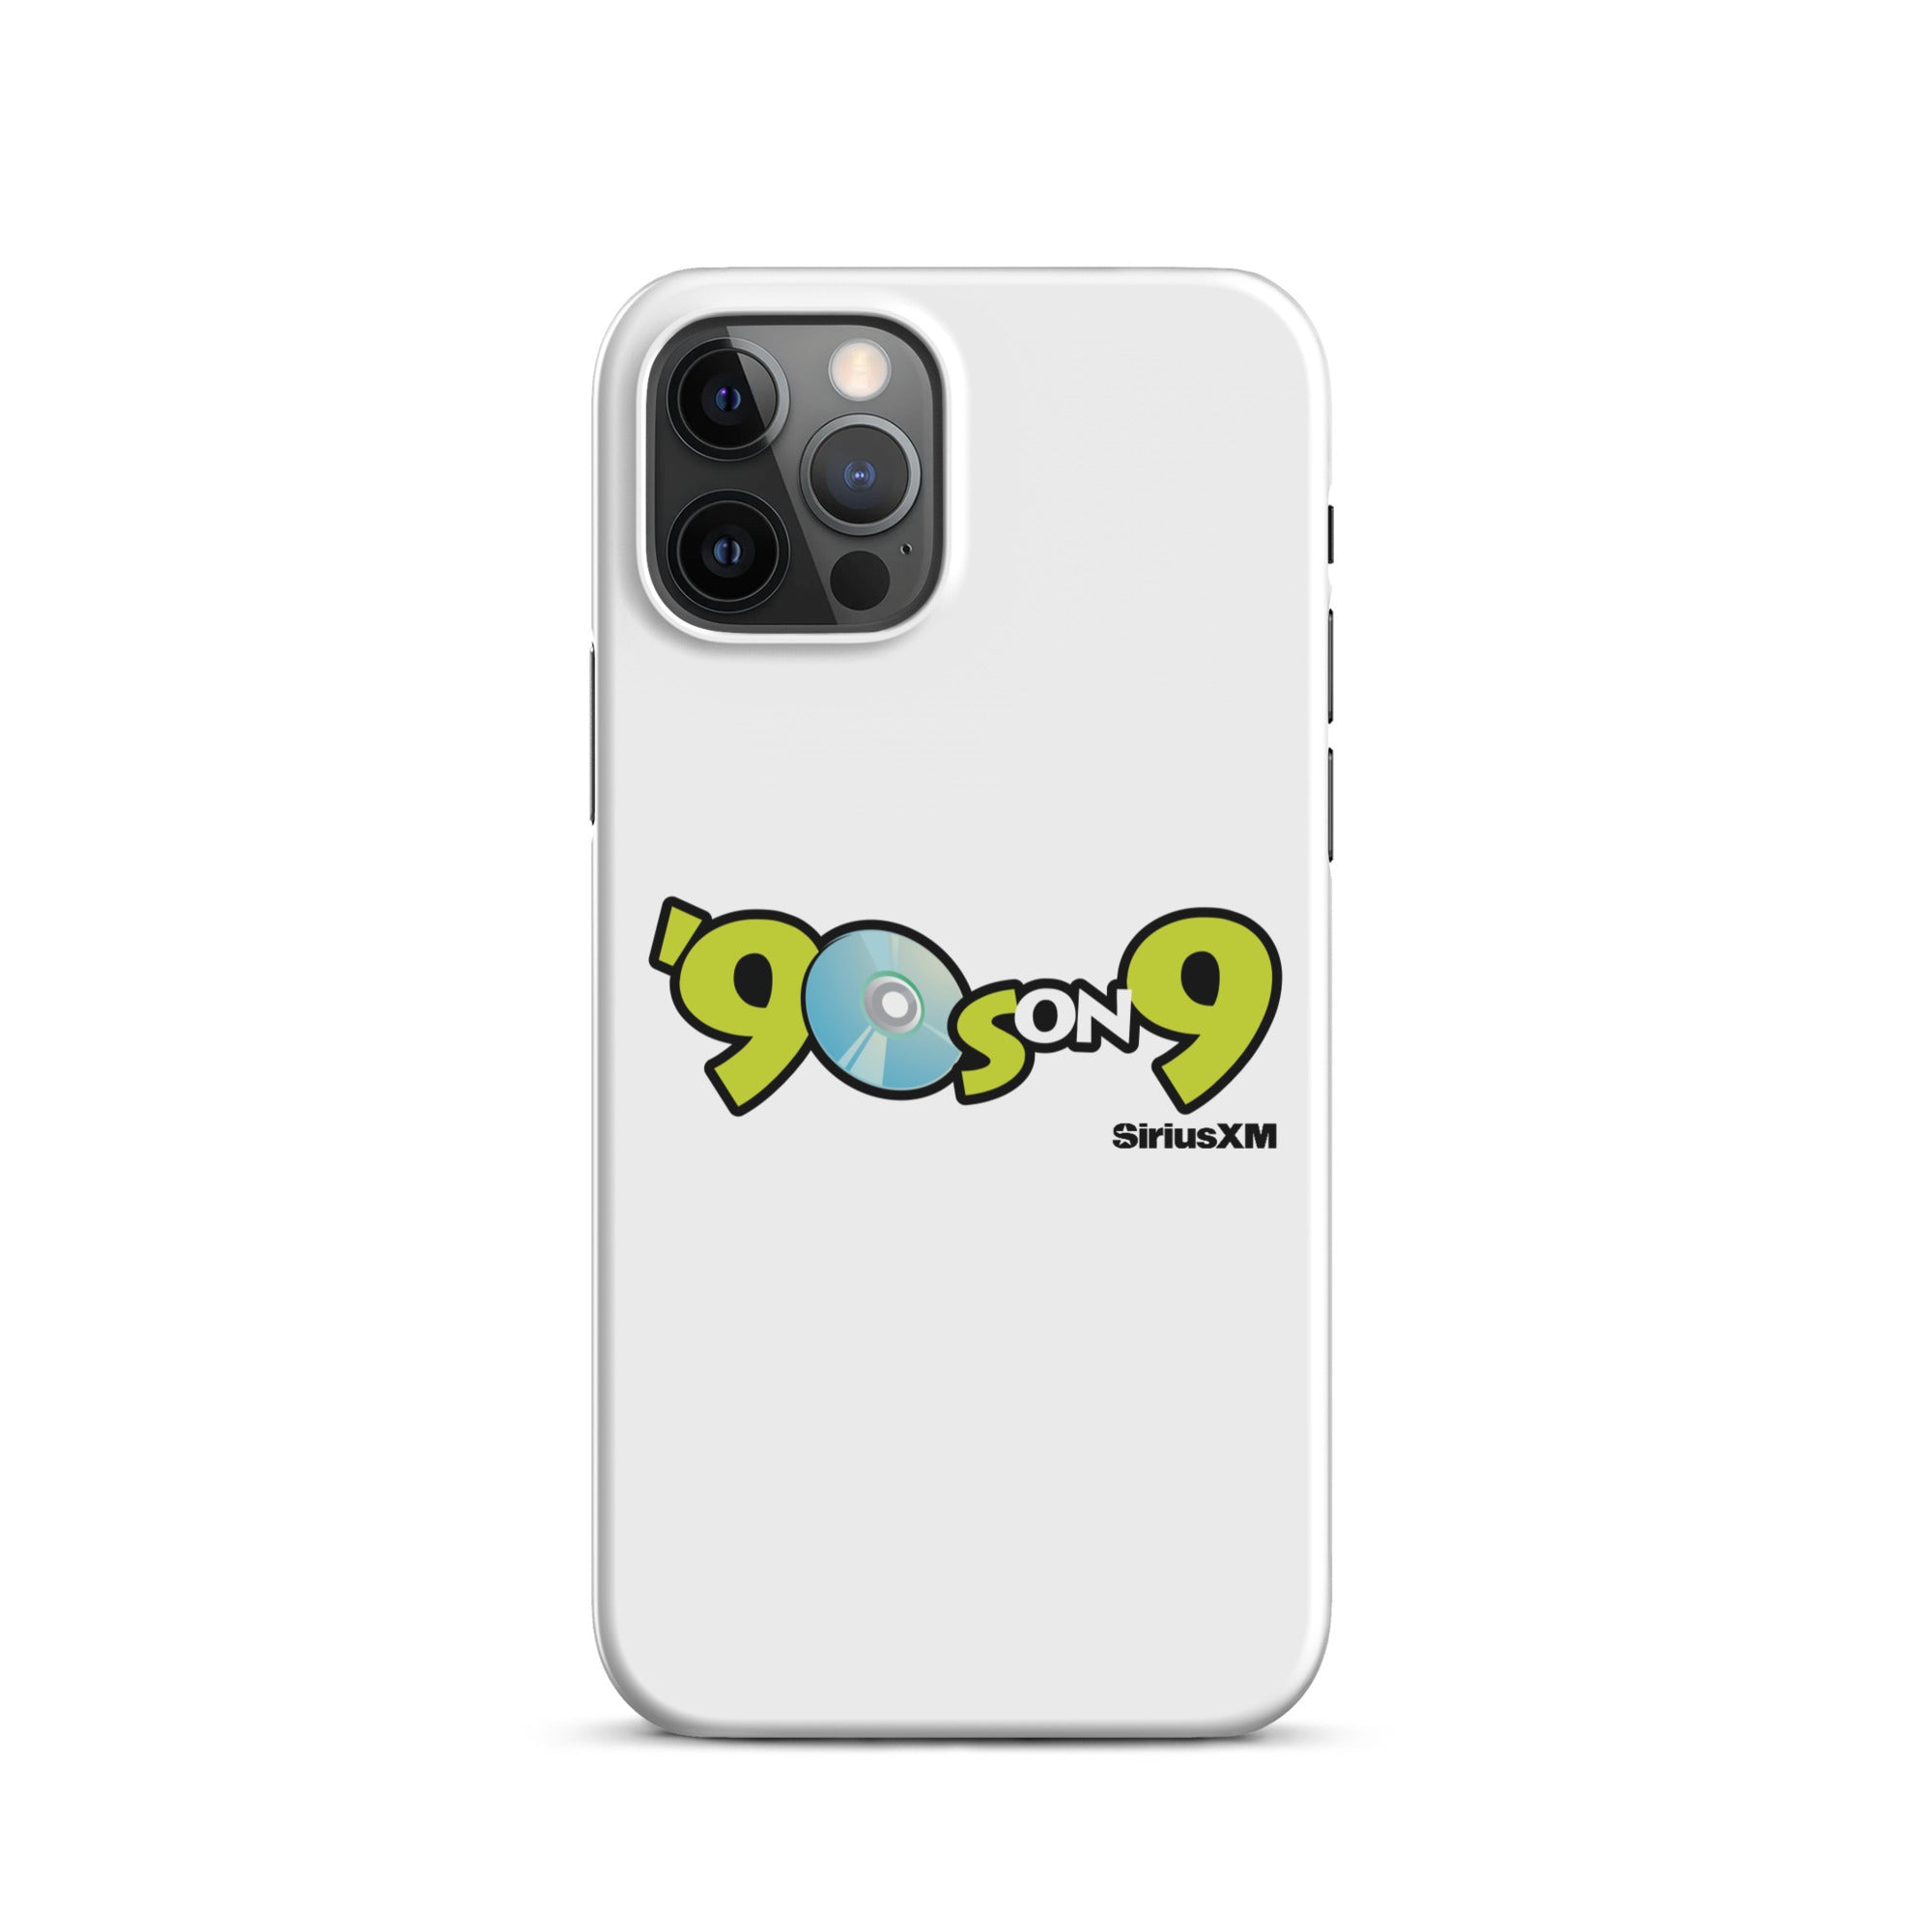 90s on 9: iPhone® Snap Case